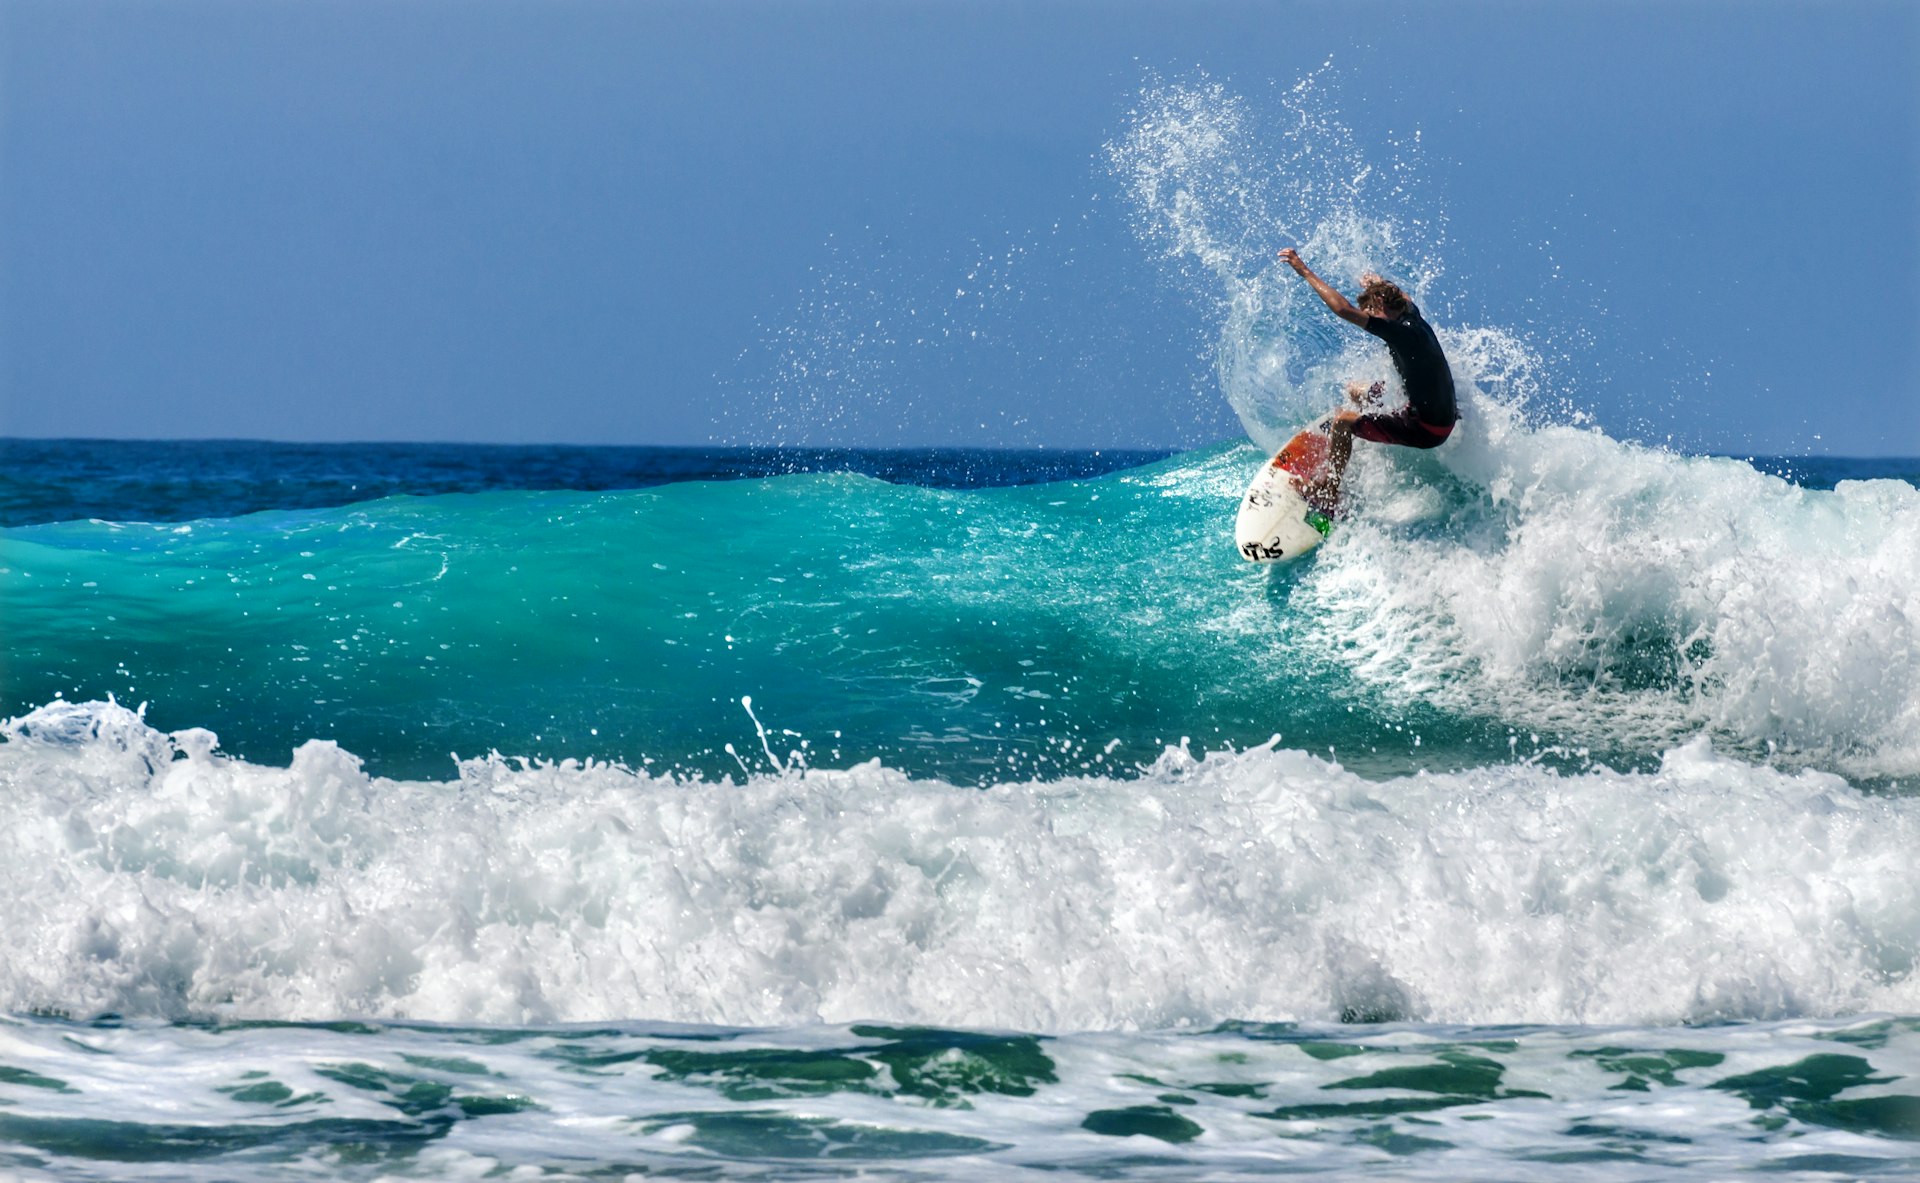 A surfer on a white and red board, riding a wave 